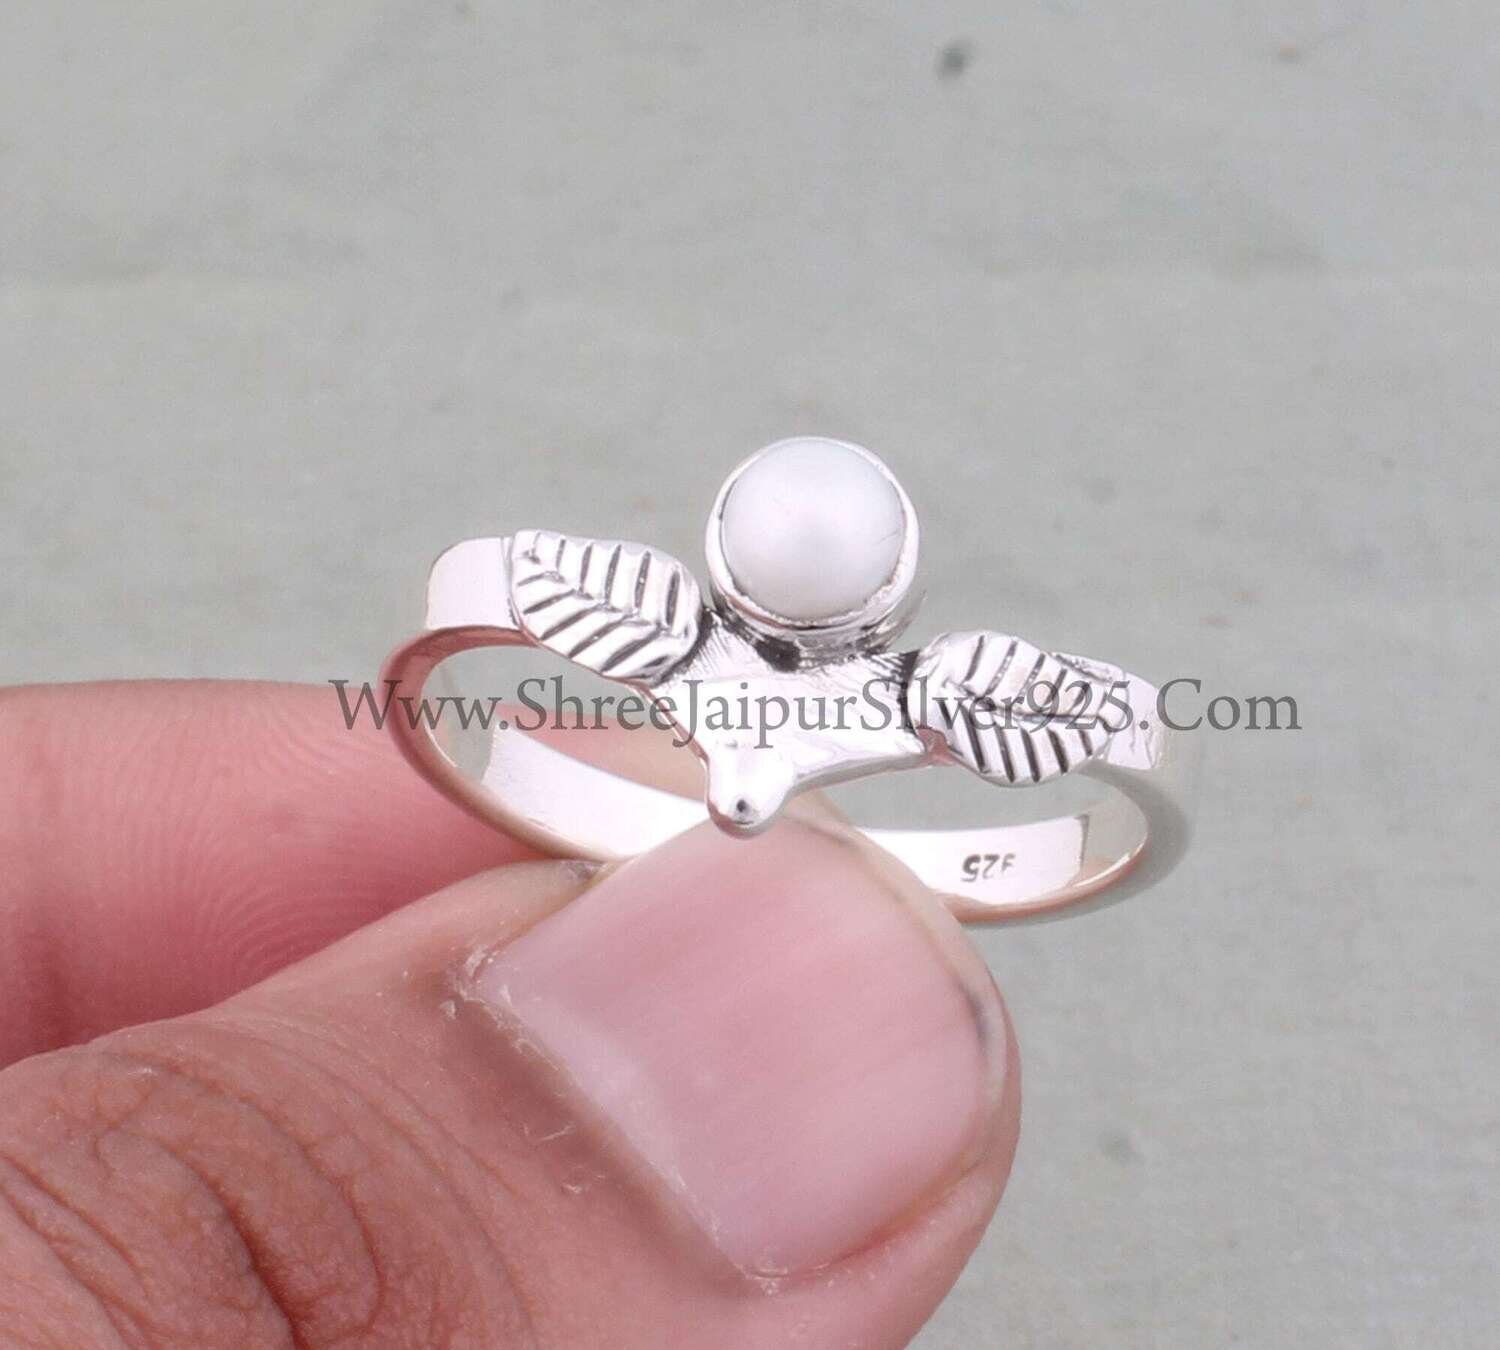 Natural Pearl Solid 925 Sterling Silver Ring For Women, Handmade Engraved Silver Leaves Fancy Round Ring Gifts For Her Bridesmaid Wedding